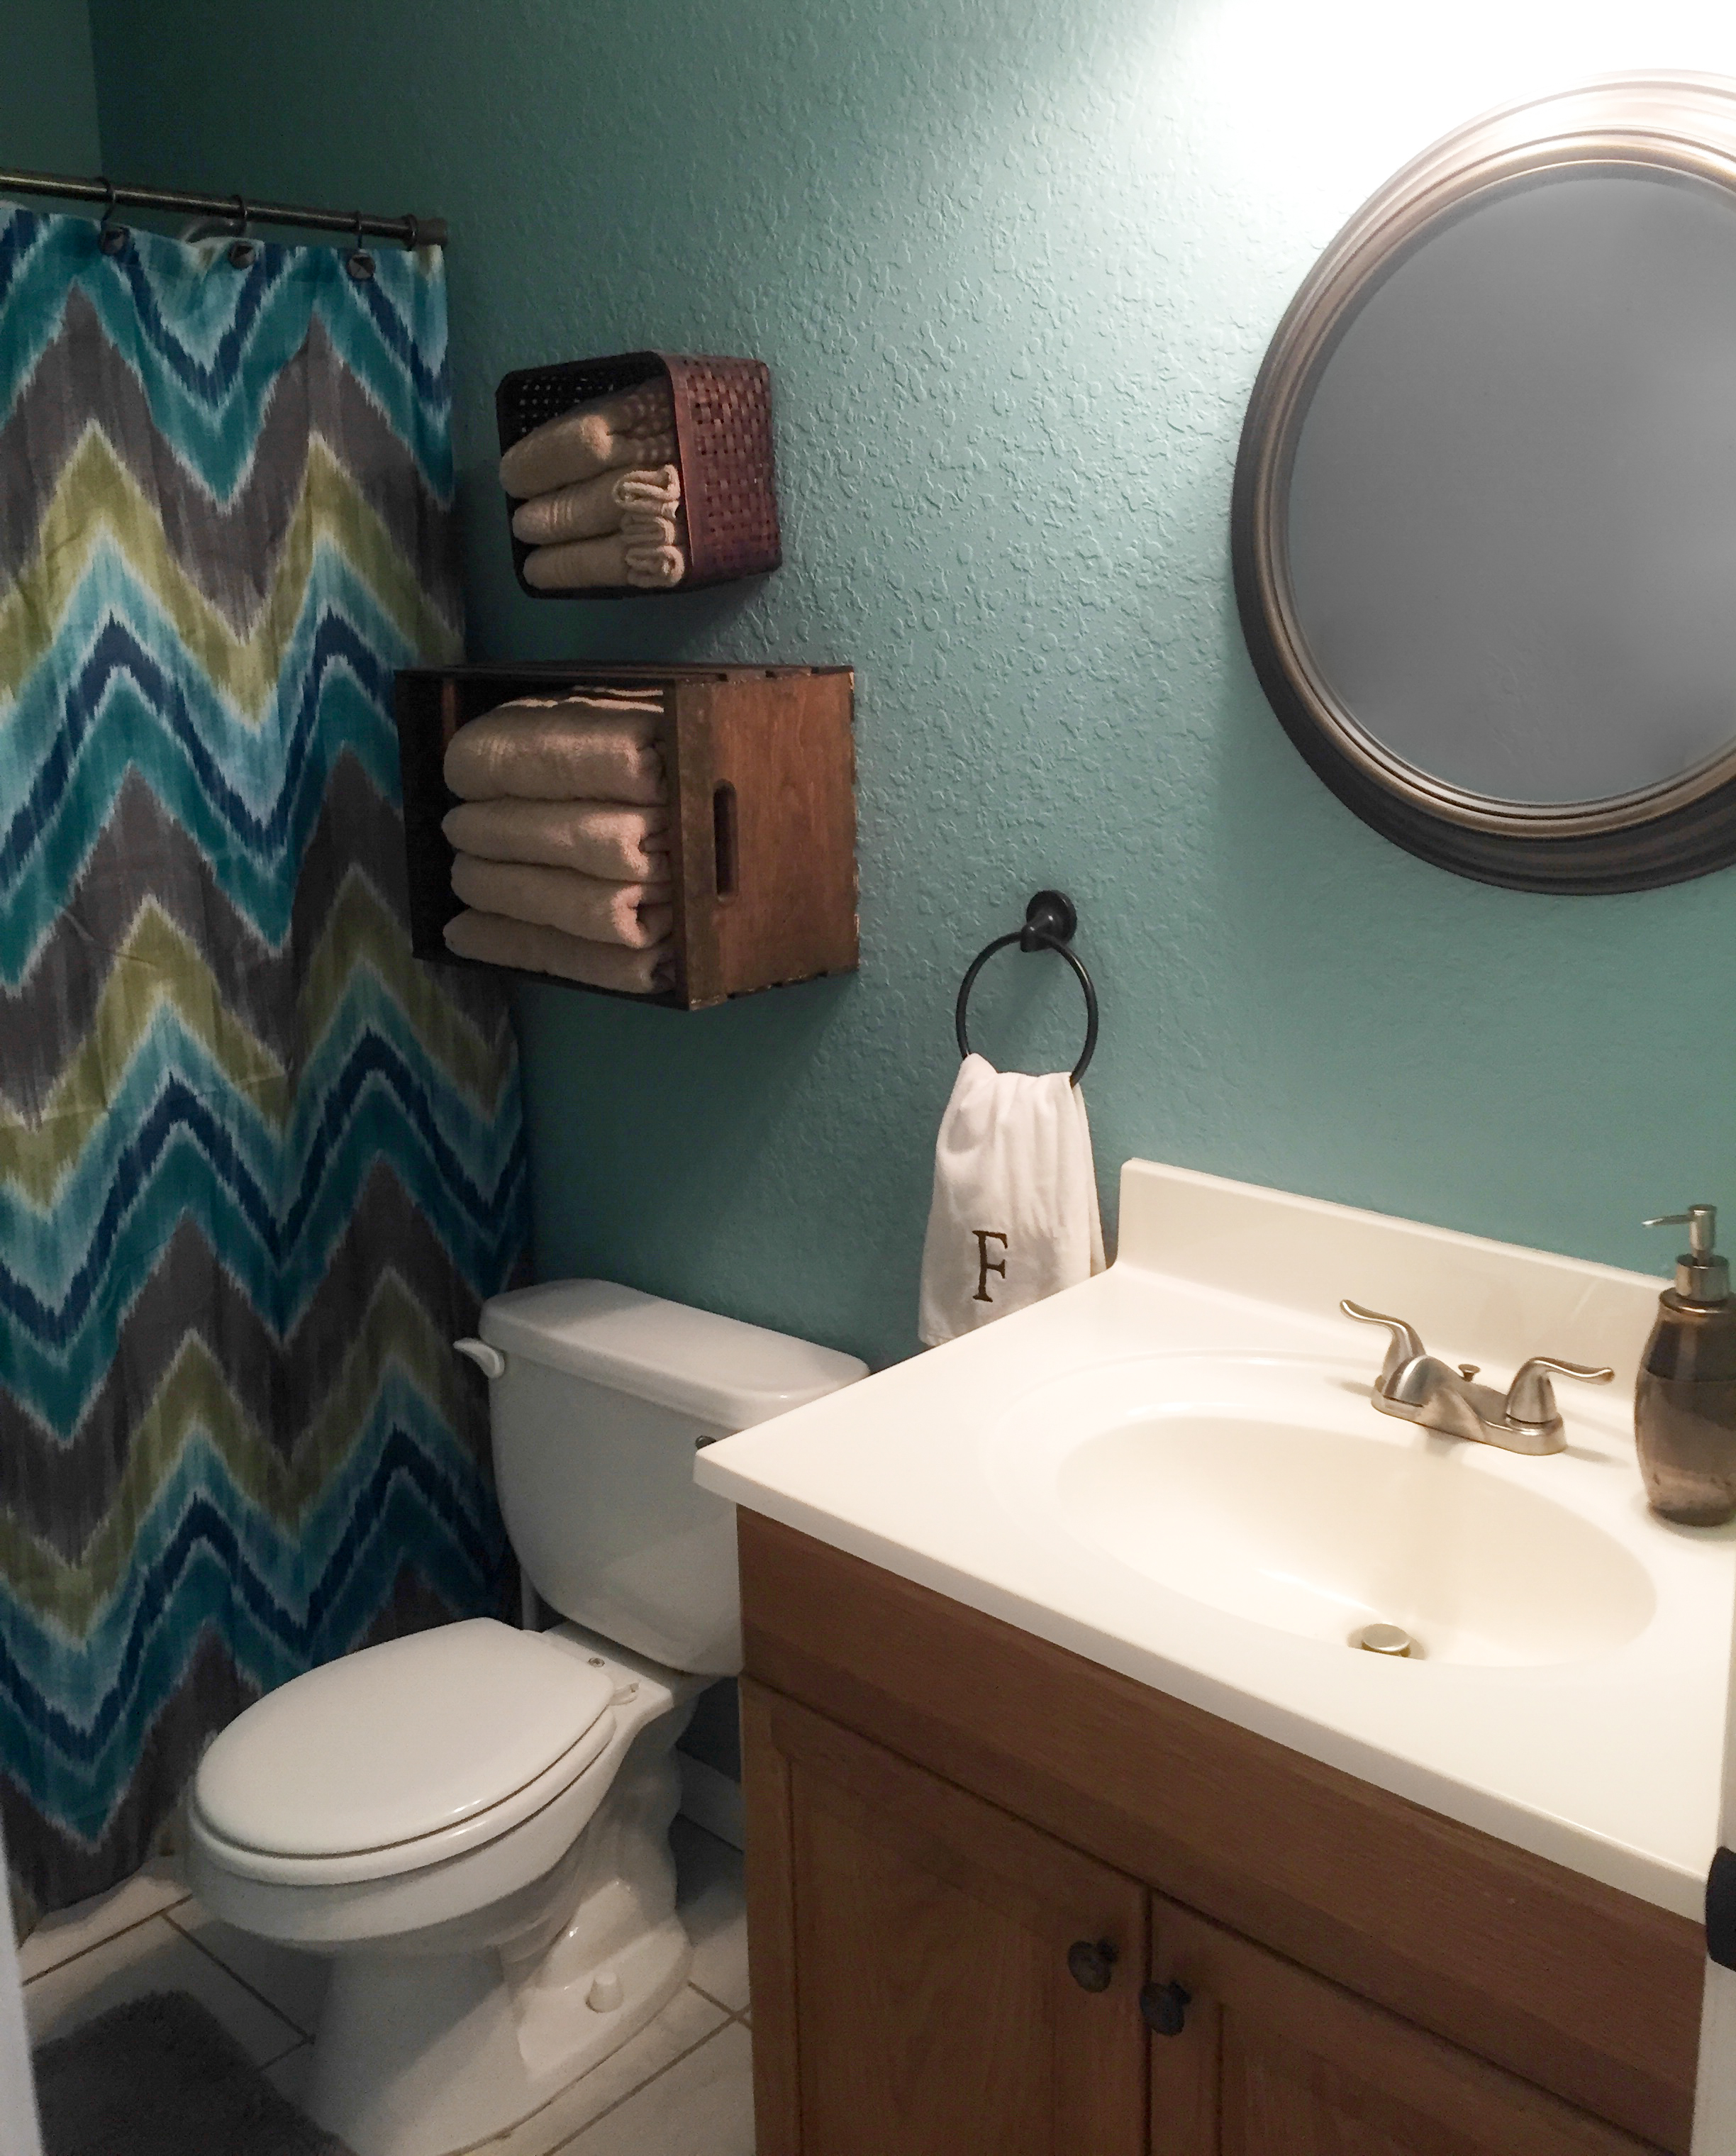 DIY Bathroom Makeover by @arfrymier on @shesintentional.